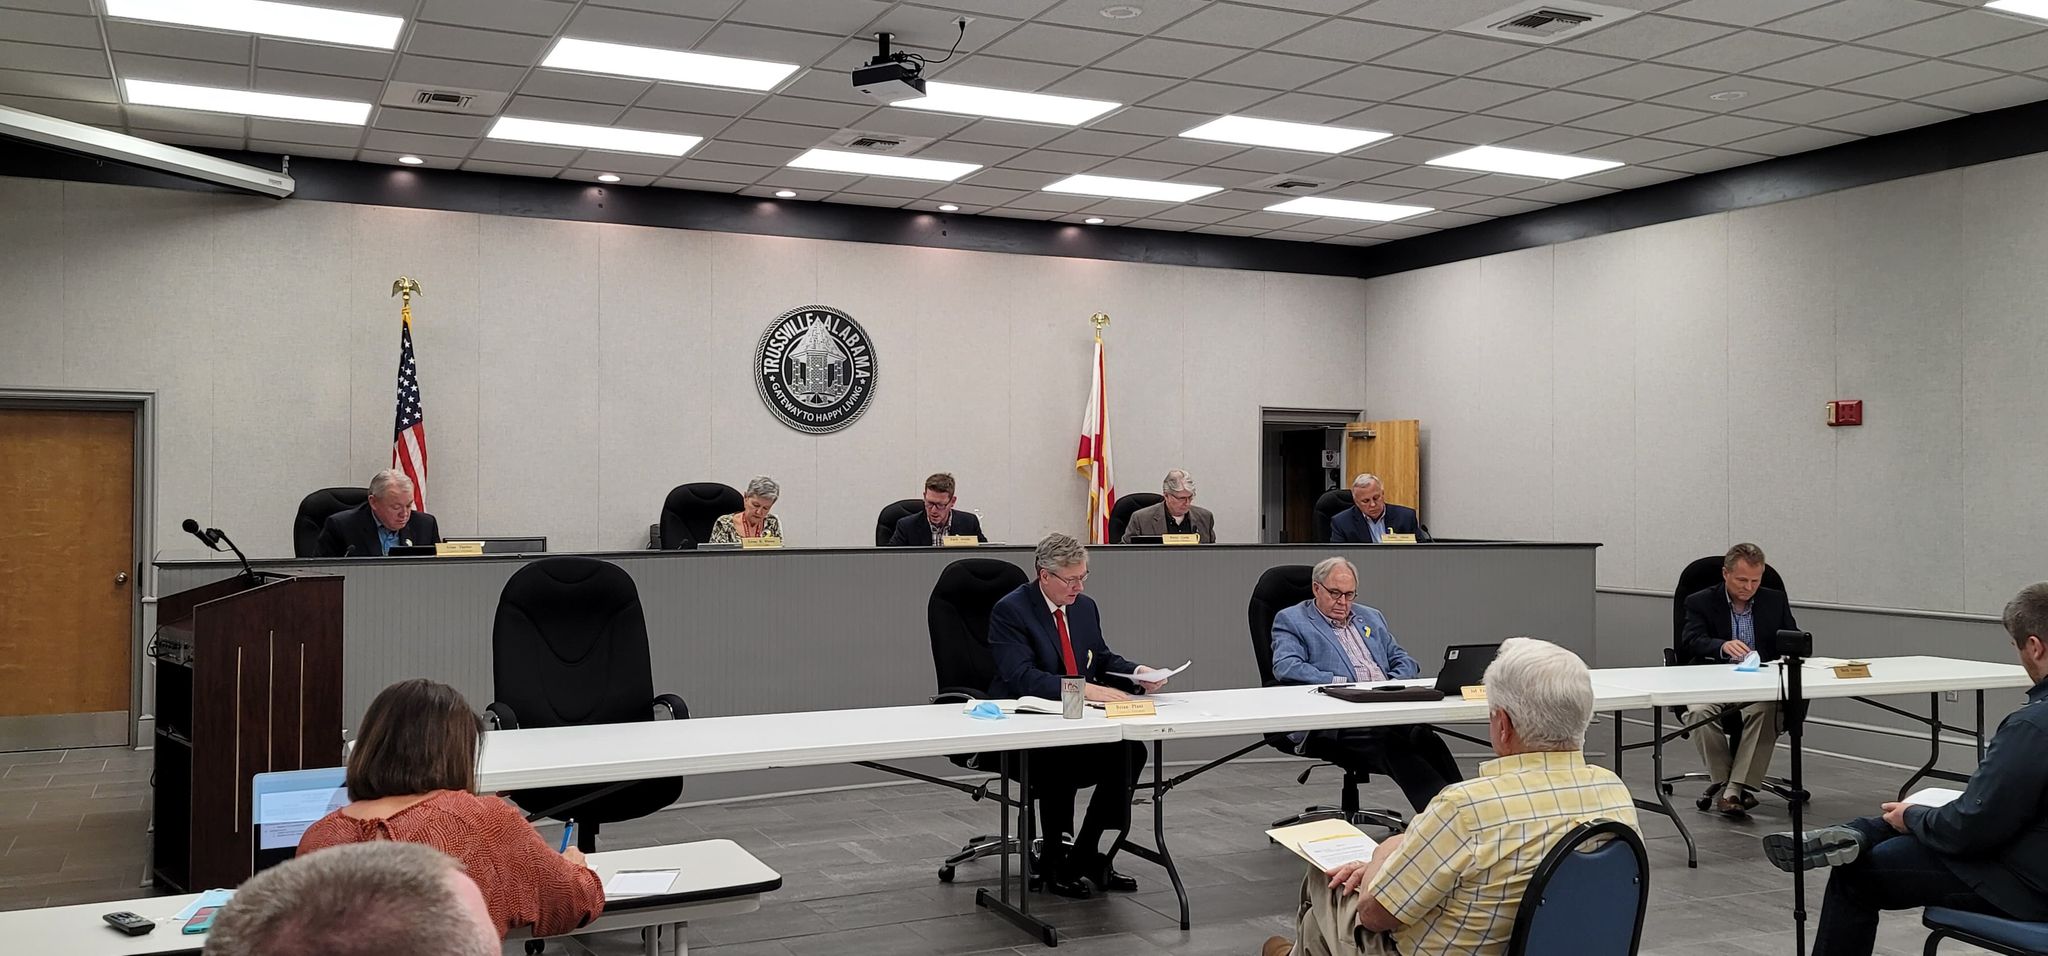 Trussville City Council approves 2020-2021 budget and approves estimate for downtown plaza